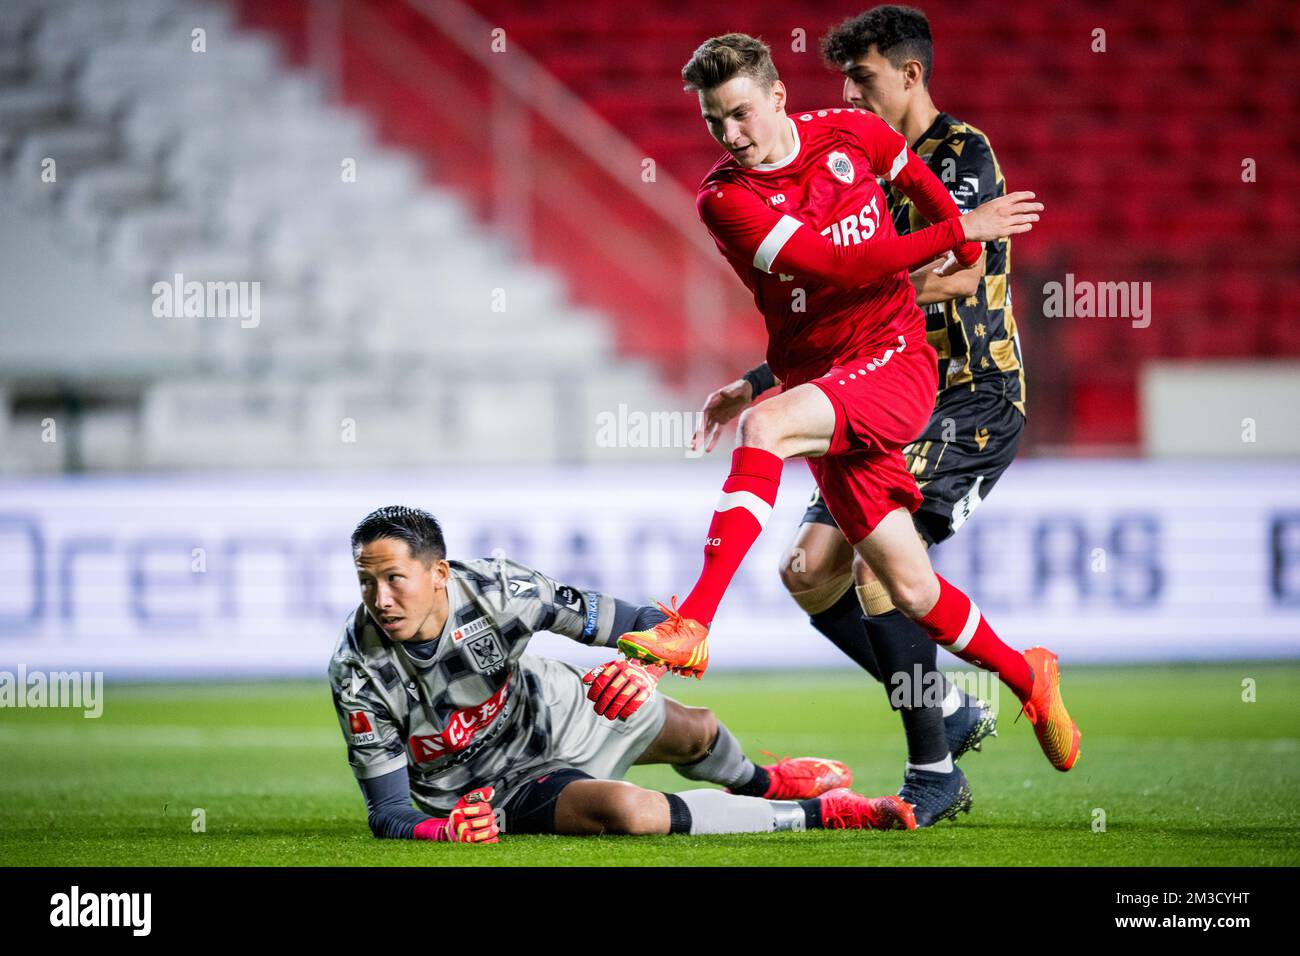 Antwerp's Pieter Gerkens scores a goal during a soccer match between Royal Antwerp FC RAFC and Sint-Truiden STVV, Friday 07 October 2022 in Antwerp, a match on day 11 of the 2022-2023 'Jupiler Pro League' first division of the Belgian championship. BELGA PHOTO JASPER JACOBS Stock Photo